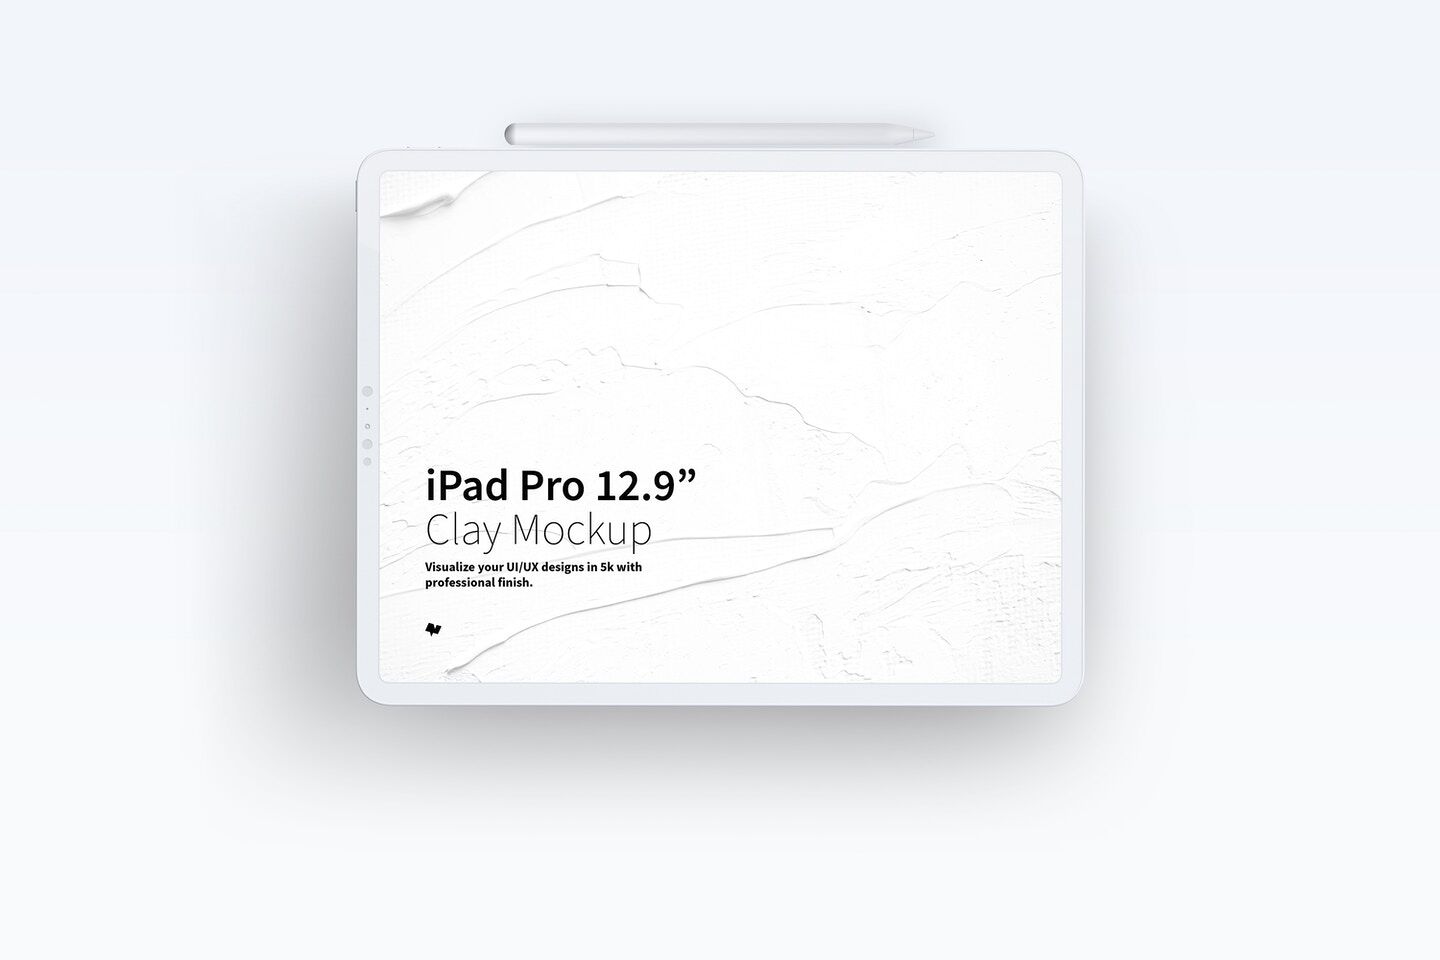 Mockup Featuring iPad Pro12.9 and Apple Pencil FREE PSD